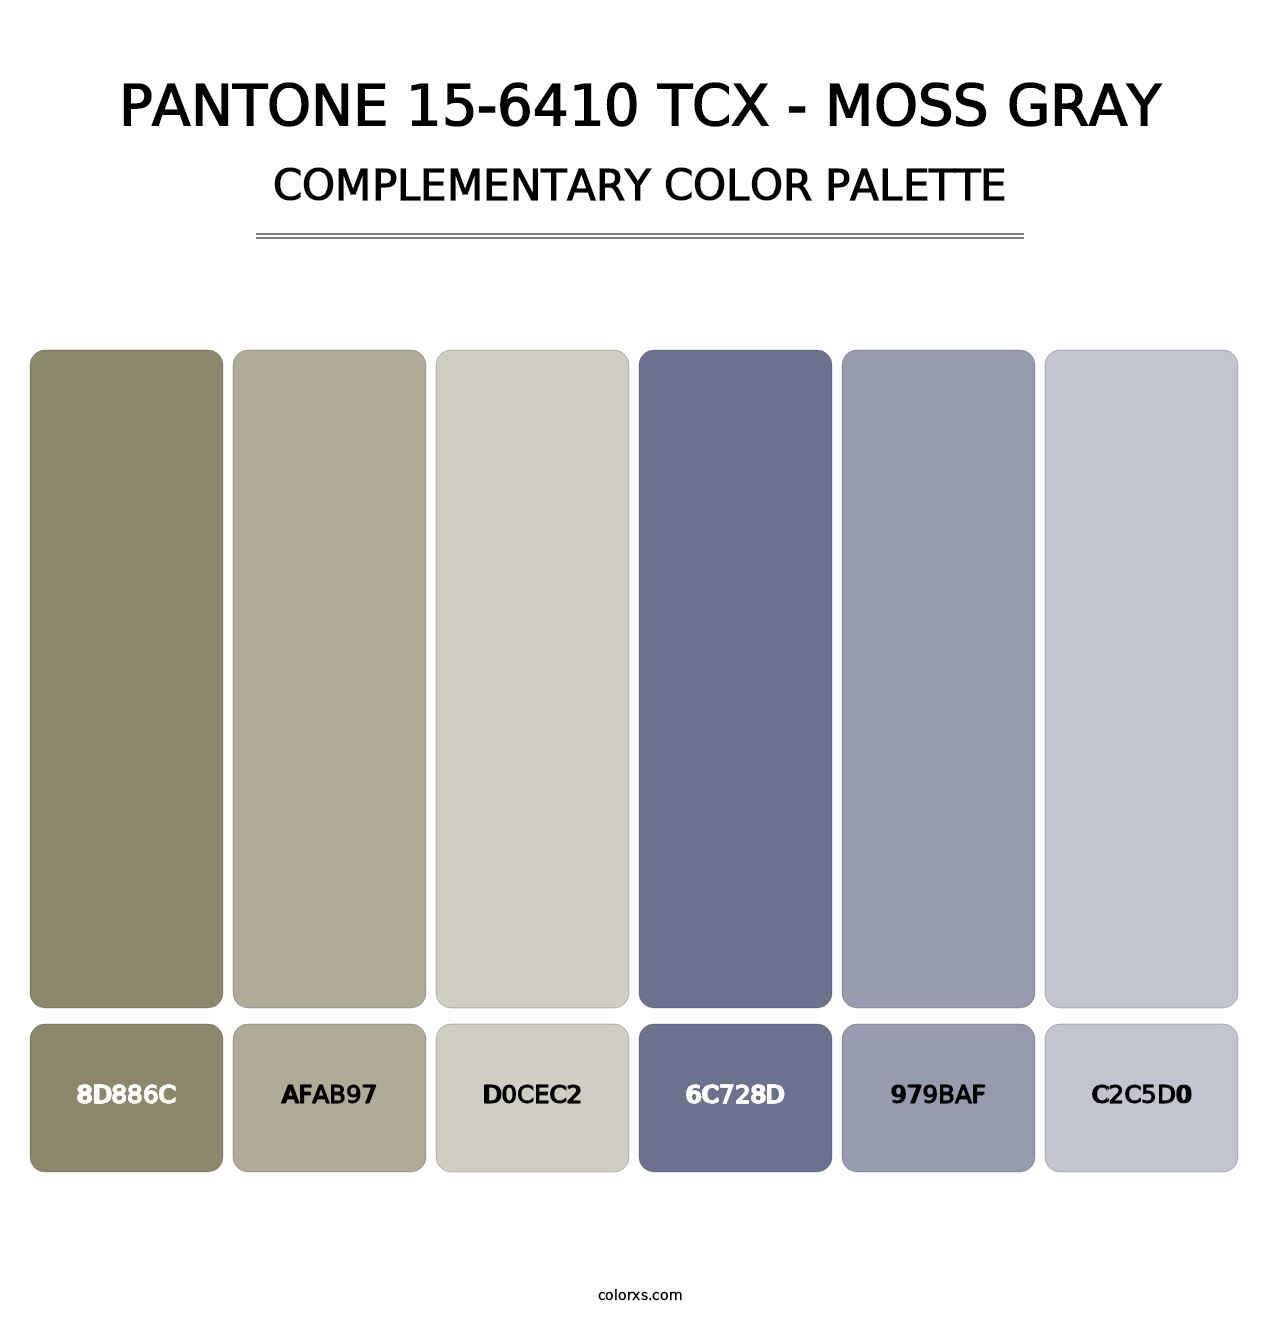 PANTONE 15-6410 TCX - Moss Gray - Complementary Color Palette